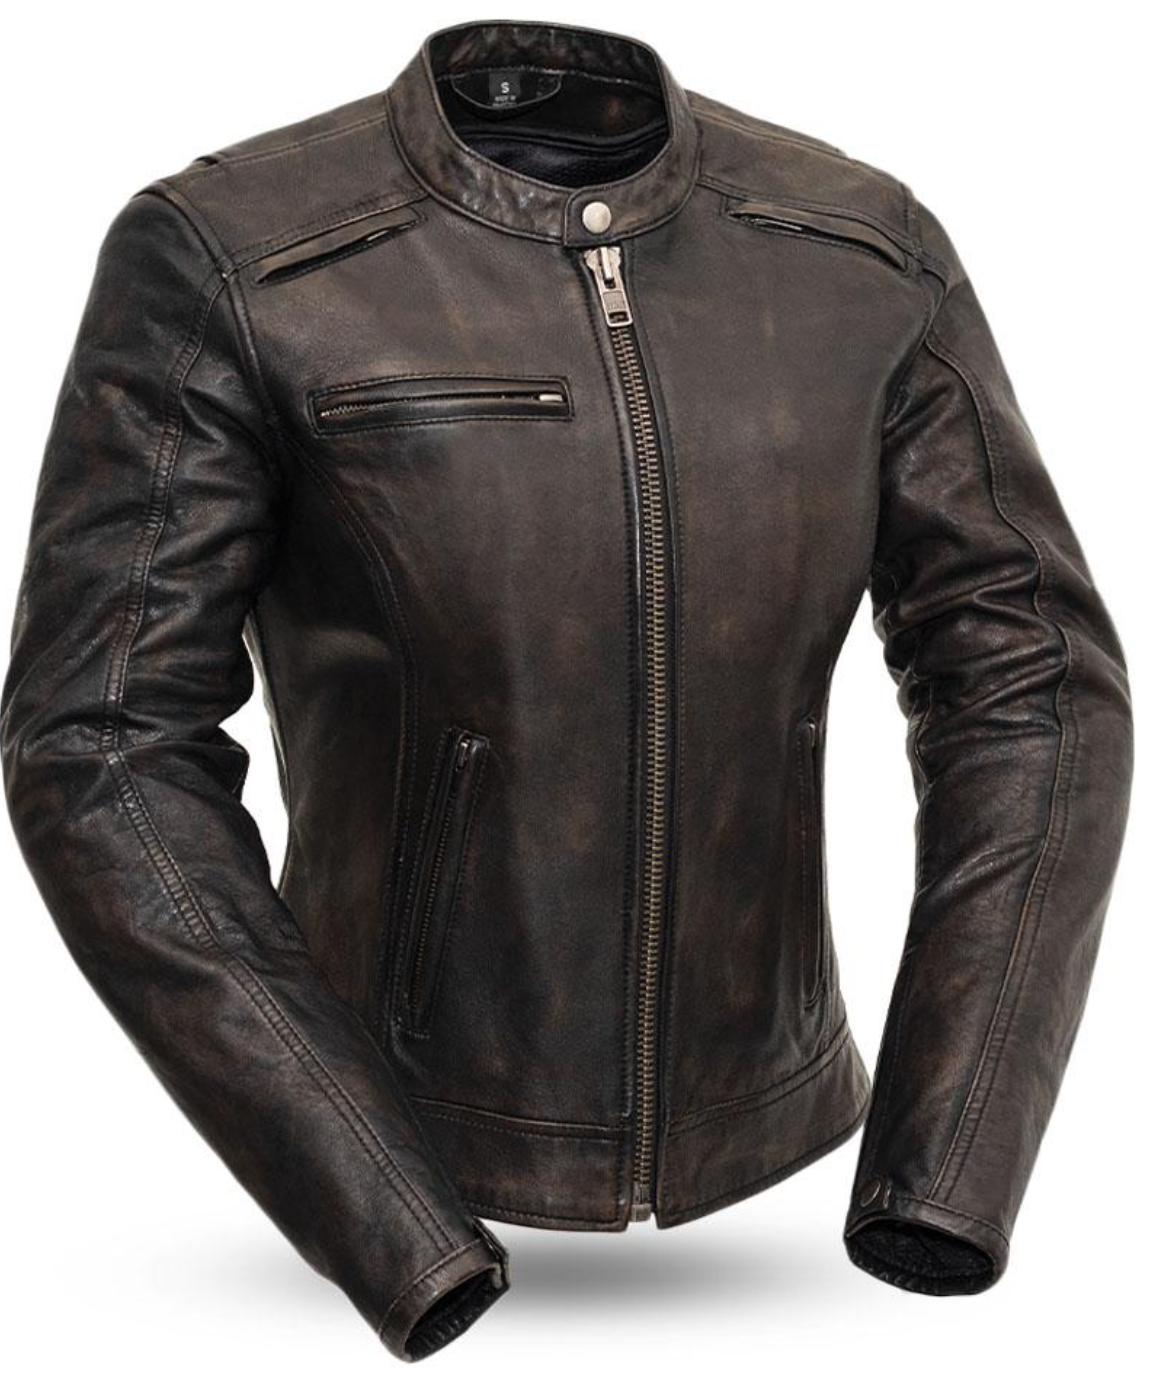 Trickster - Women's Leather Motorcycle Jacket